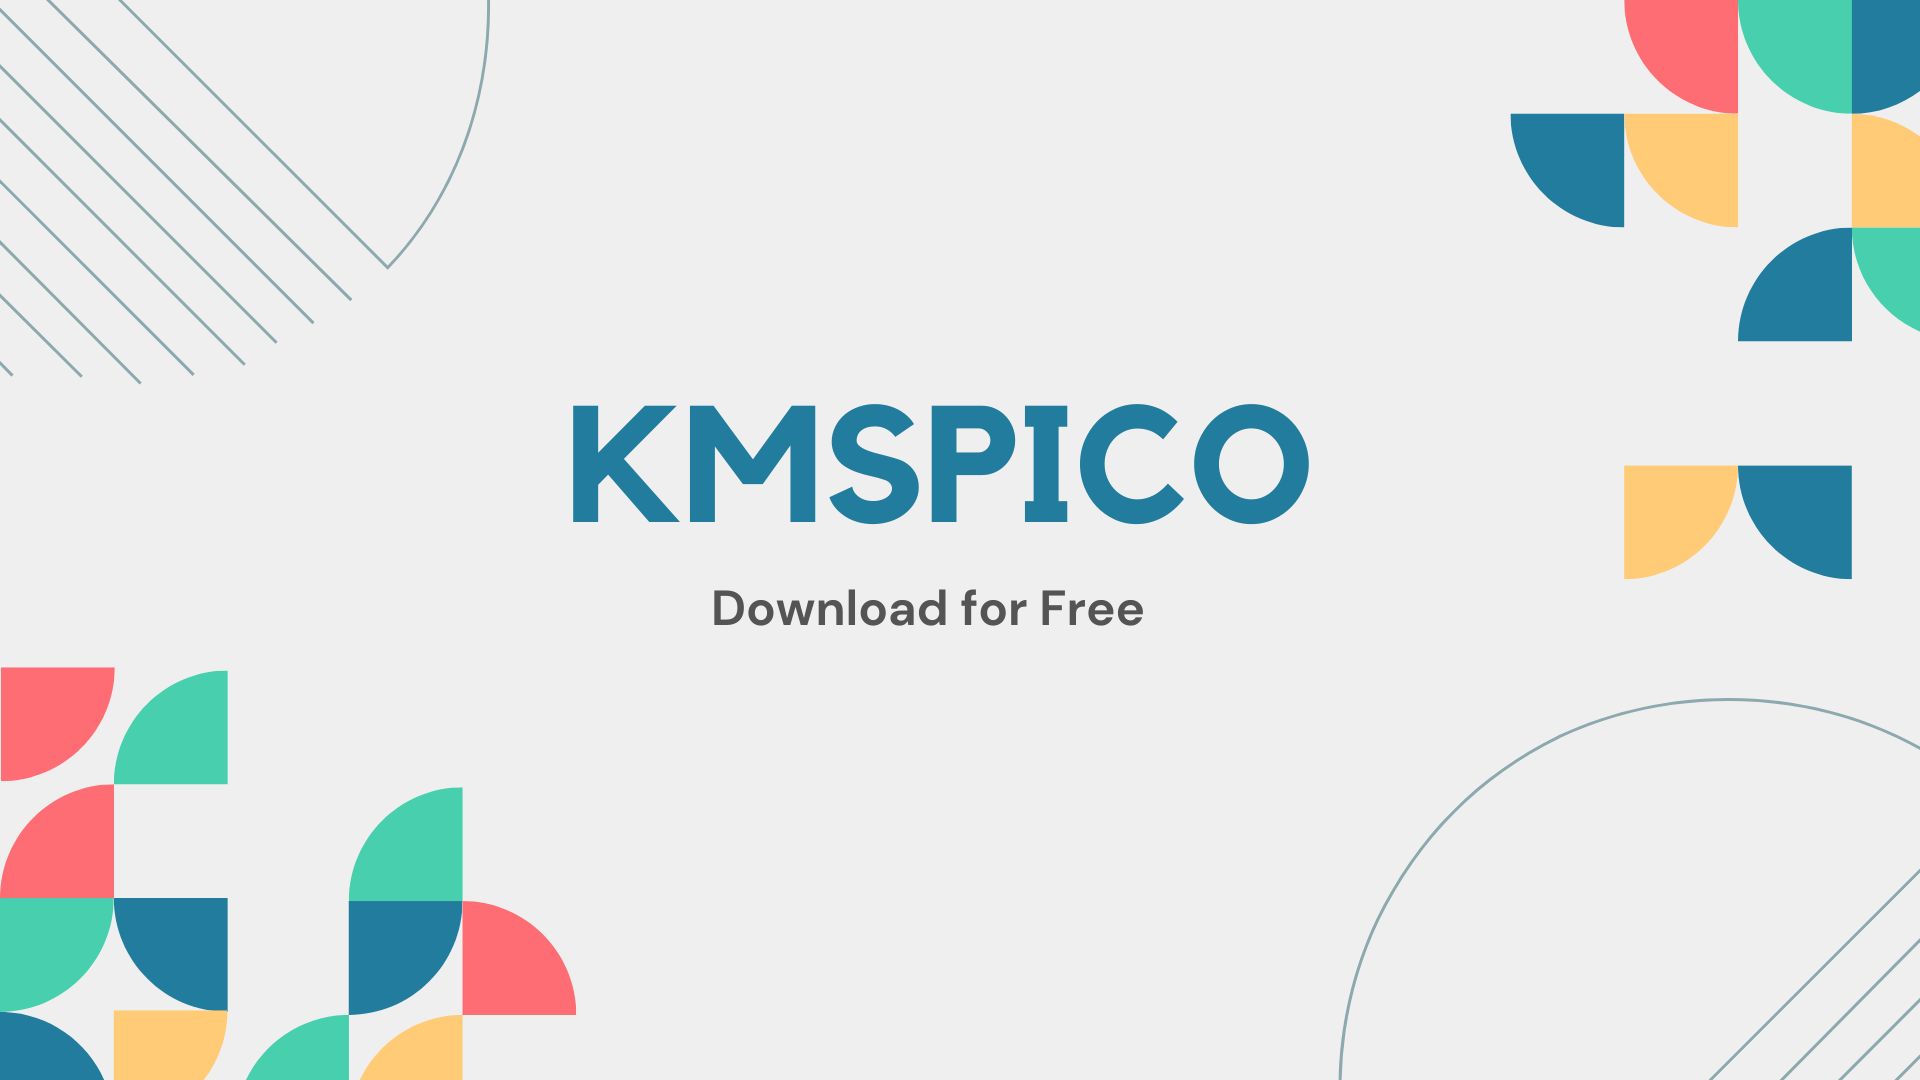 KMSpico Download for Free